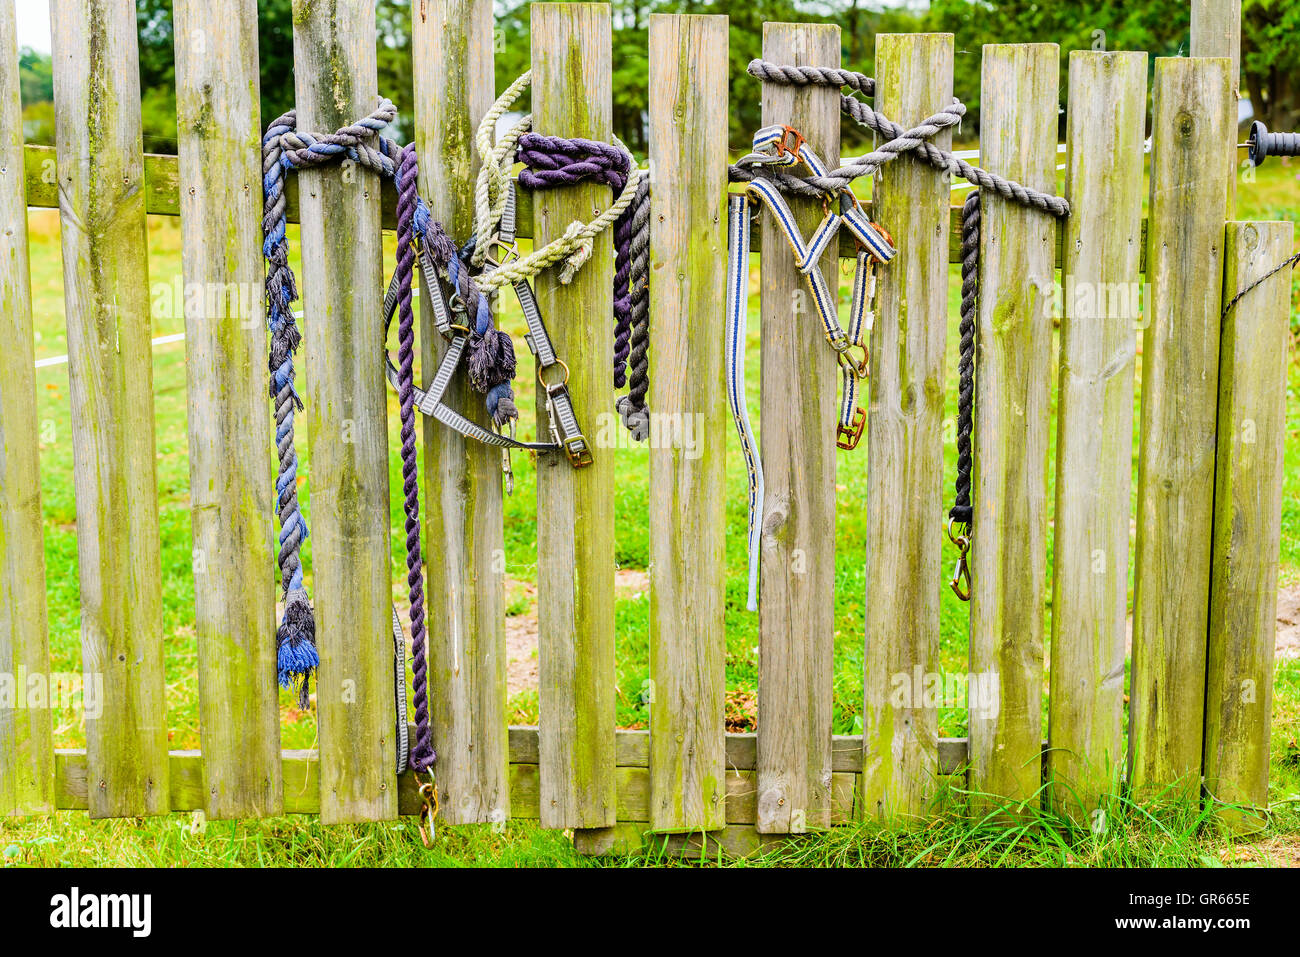 Old horse halters and ropes on a wooden gate with grassy field behind. Stock Photo